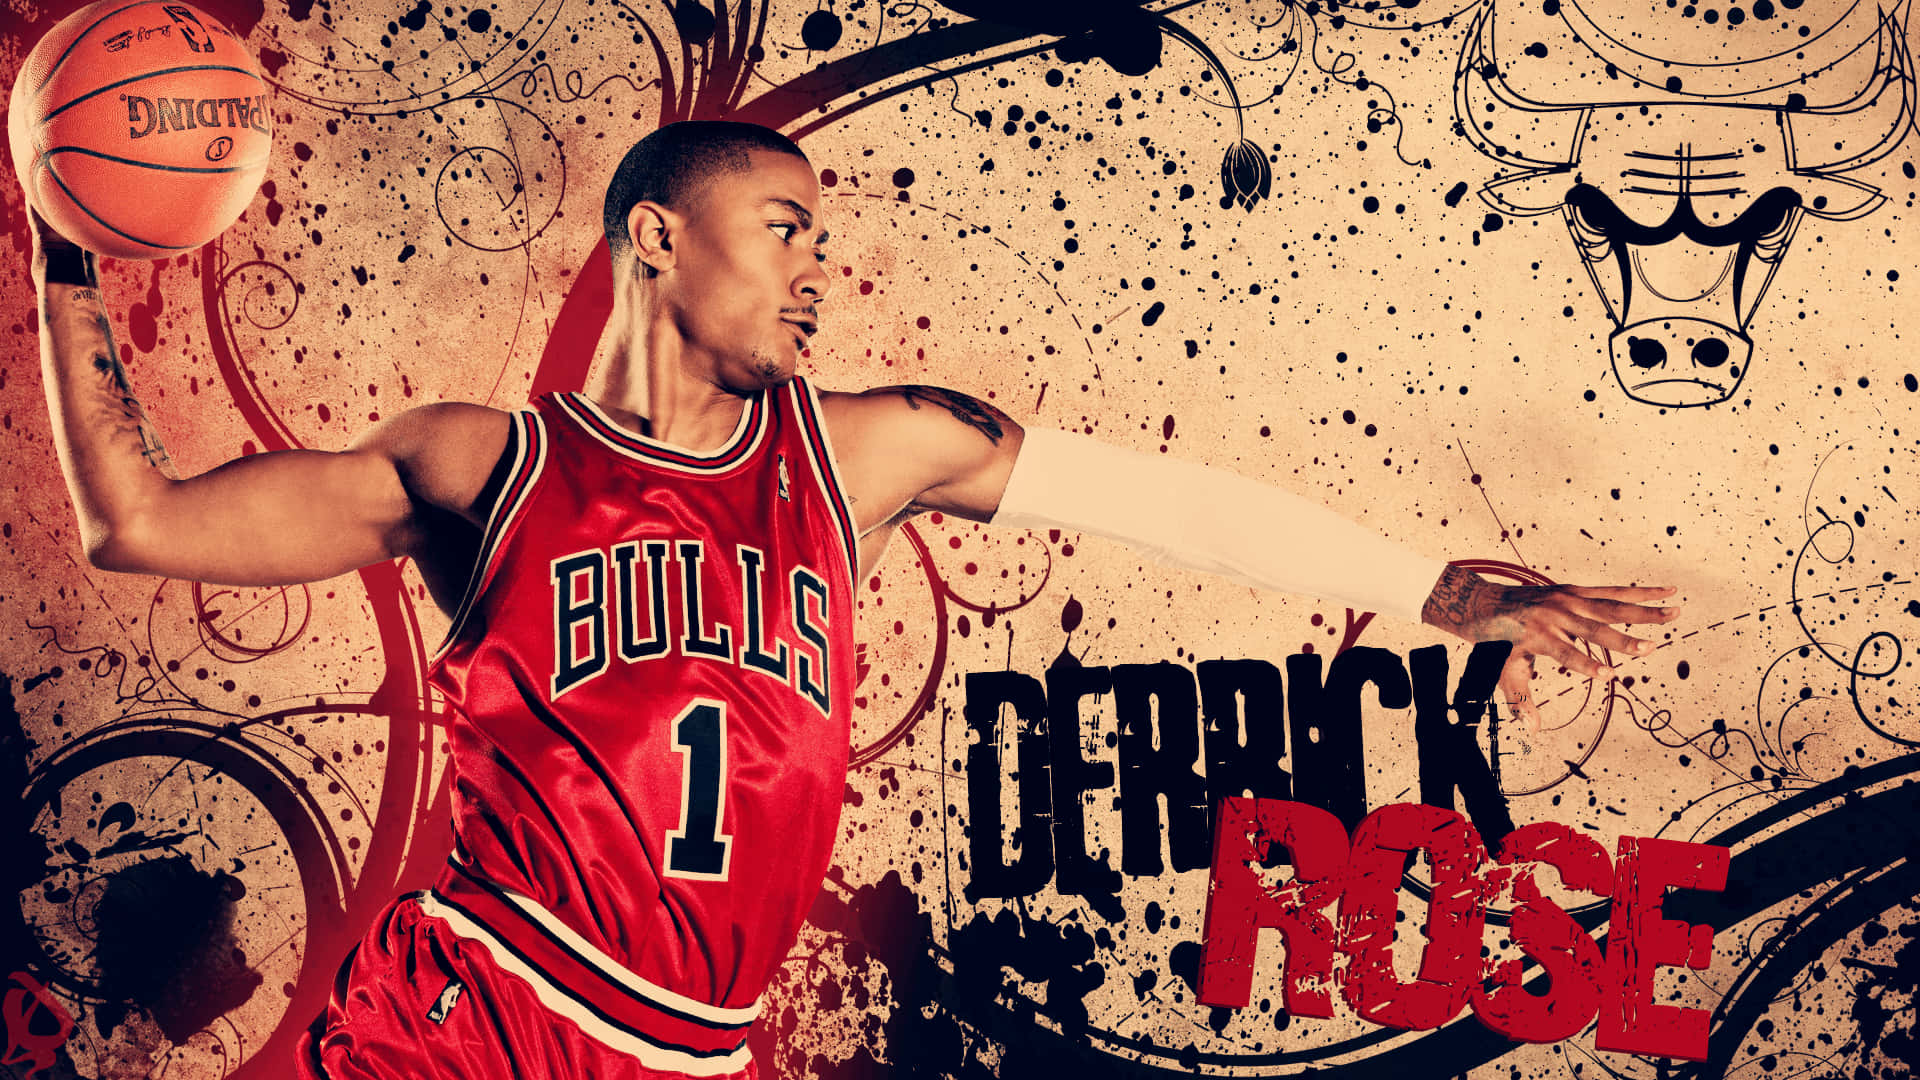 Download Chicago Bulls star Derrick Rose goes for a layup